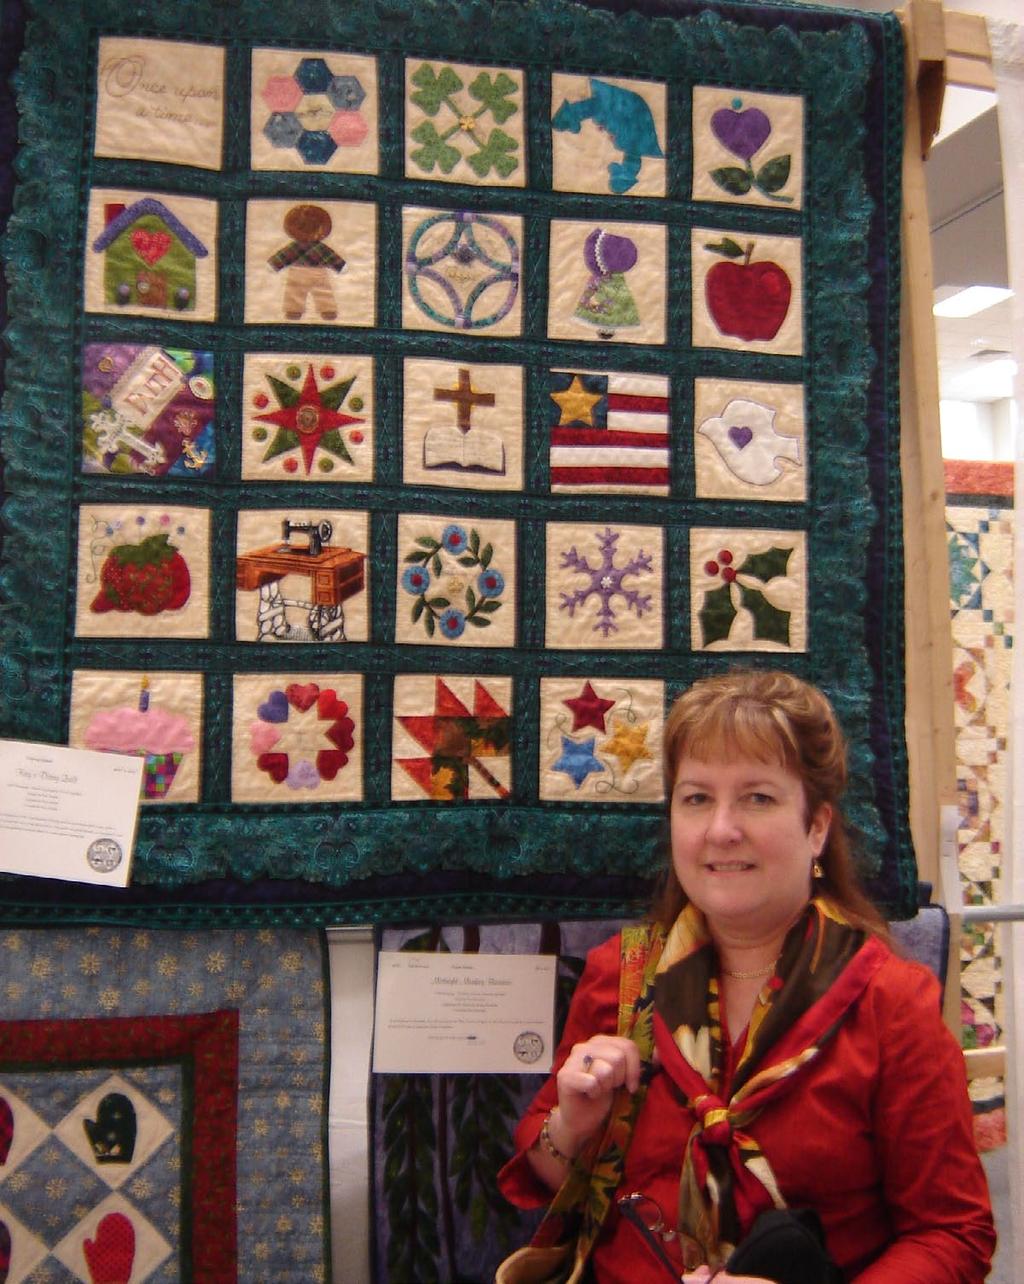 Kay B. There was a quilt shop where she lived called the Quilters Cupboard that featured wonderful quilt classes.